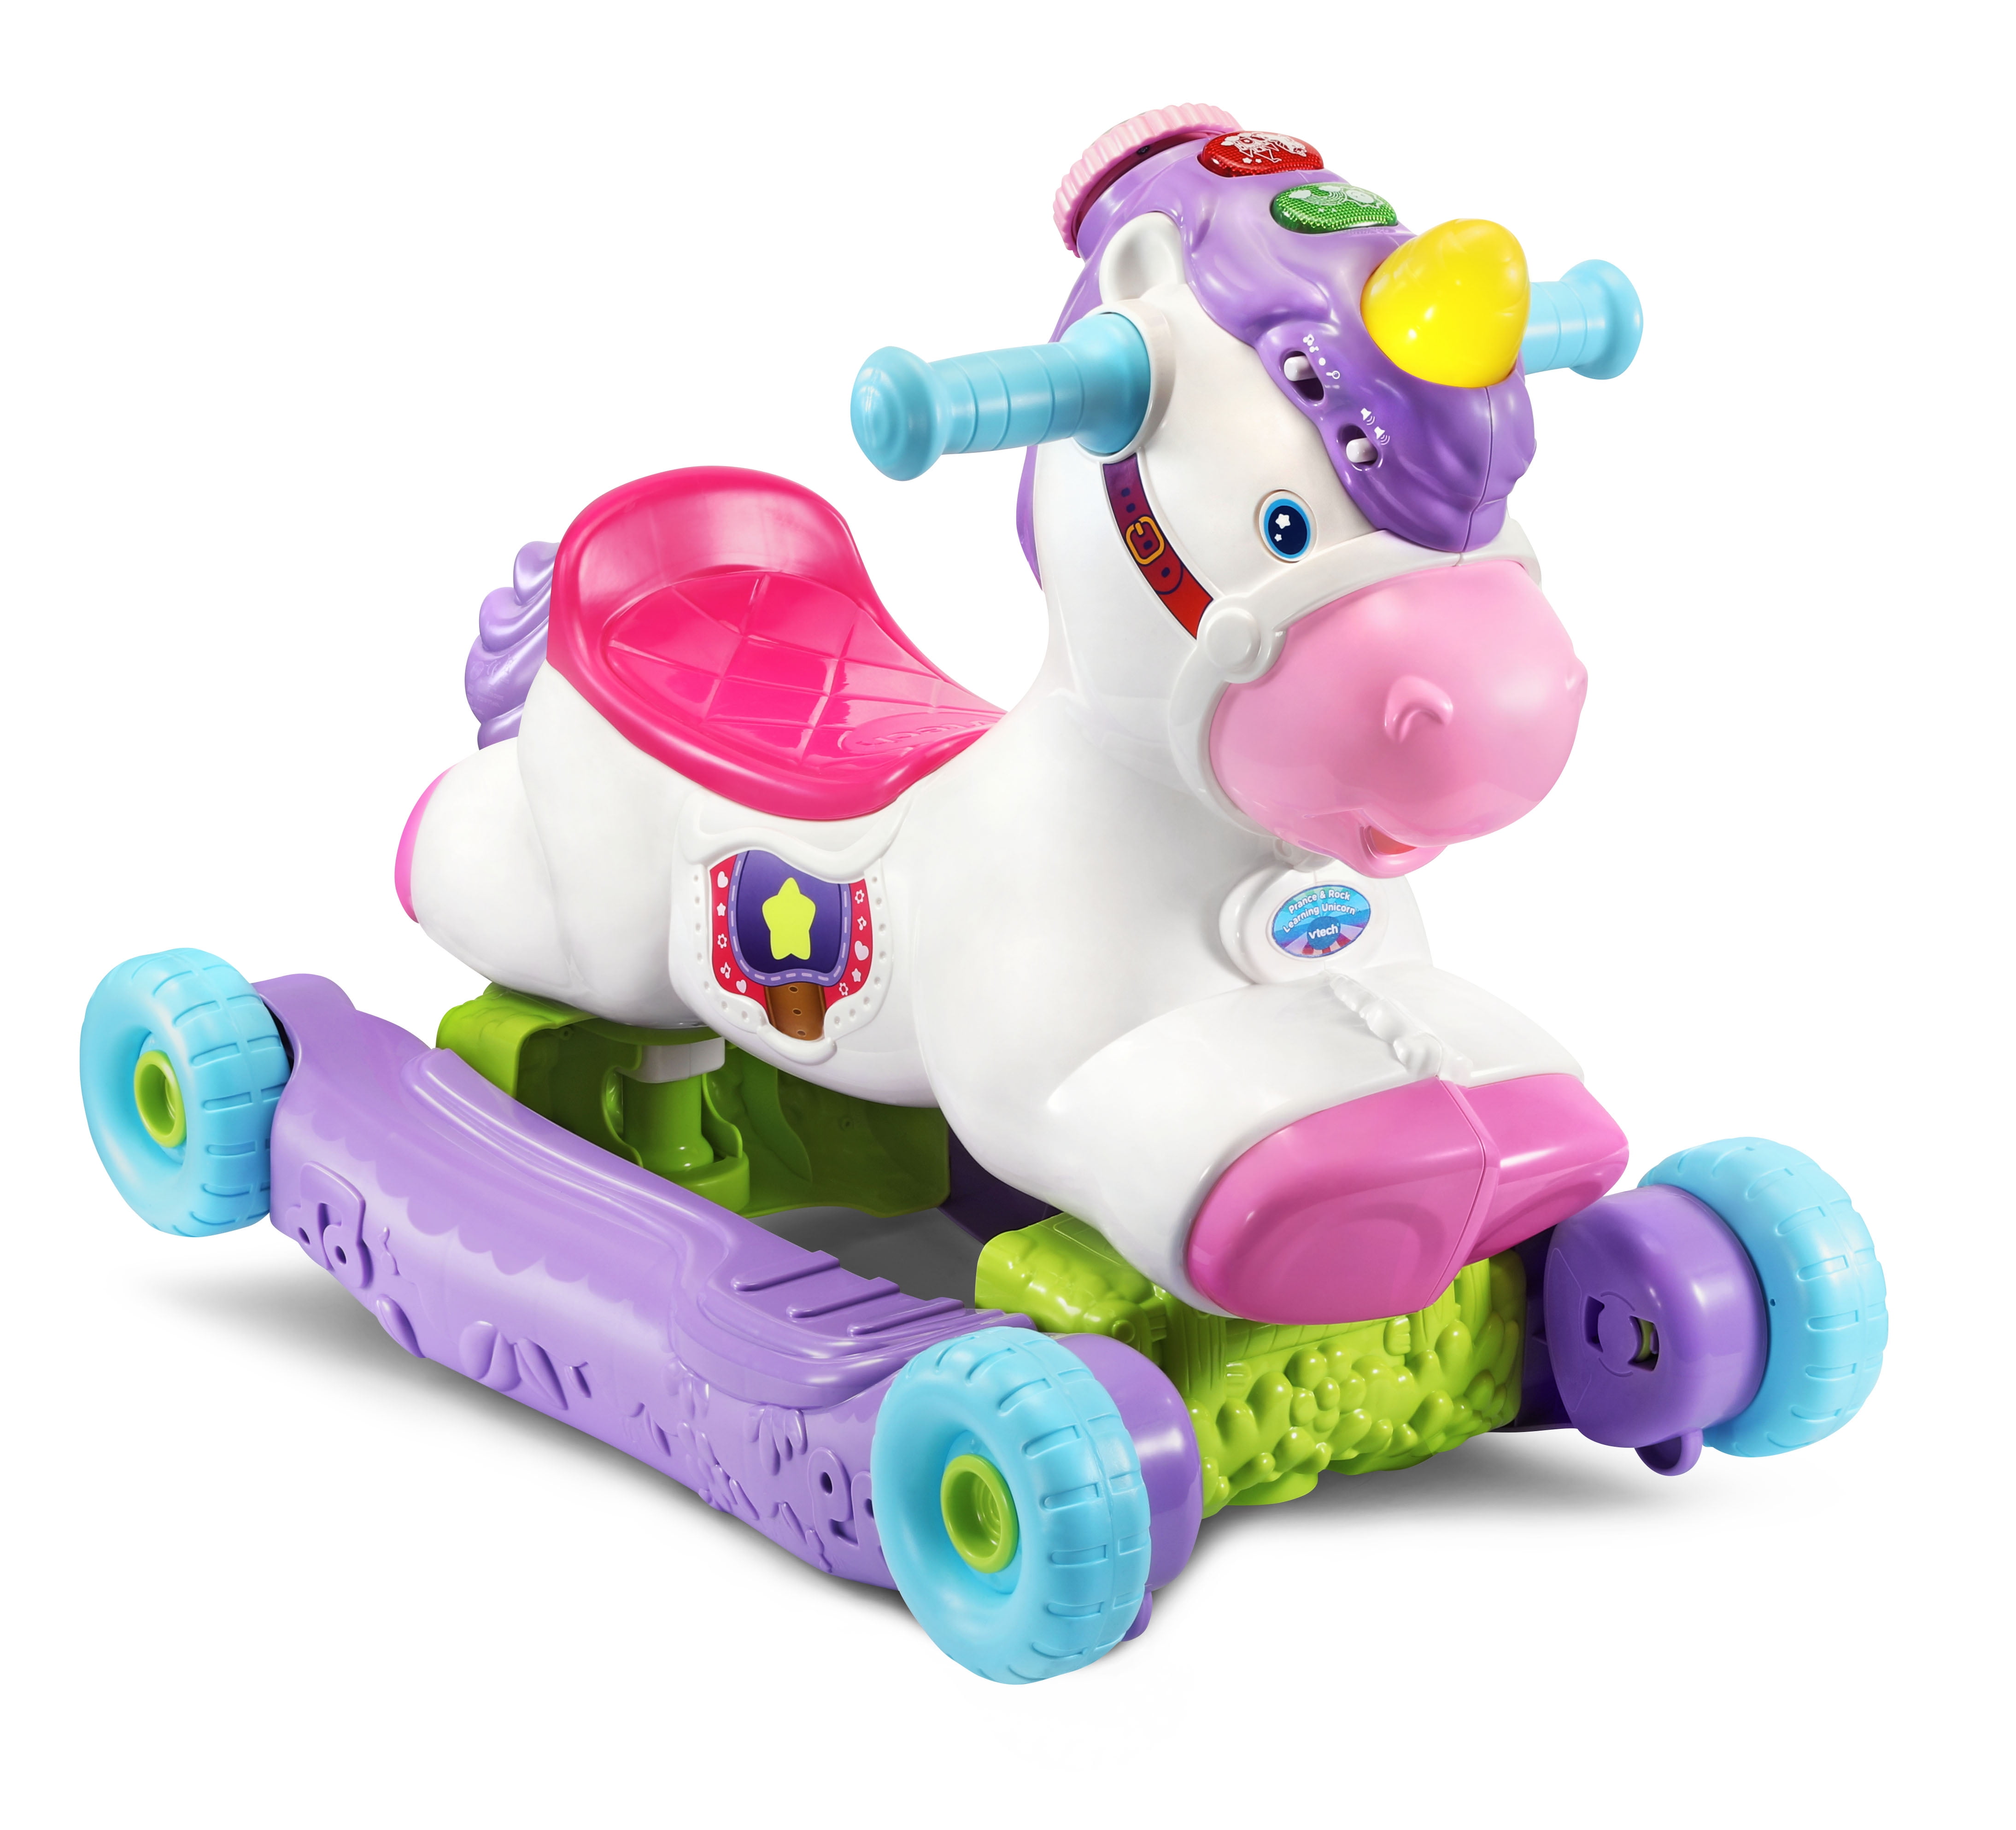 2 and 3 Years Old Interactive Baby Musical Toy with Learning and Sound Features Rocker VTech Rock and Ride Unicorn Baby Ride On Toy First Steps Walking Support for Babies & Toddlers Aged 1